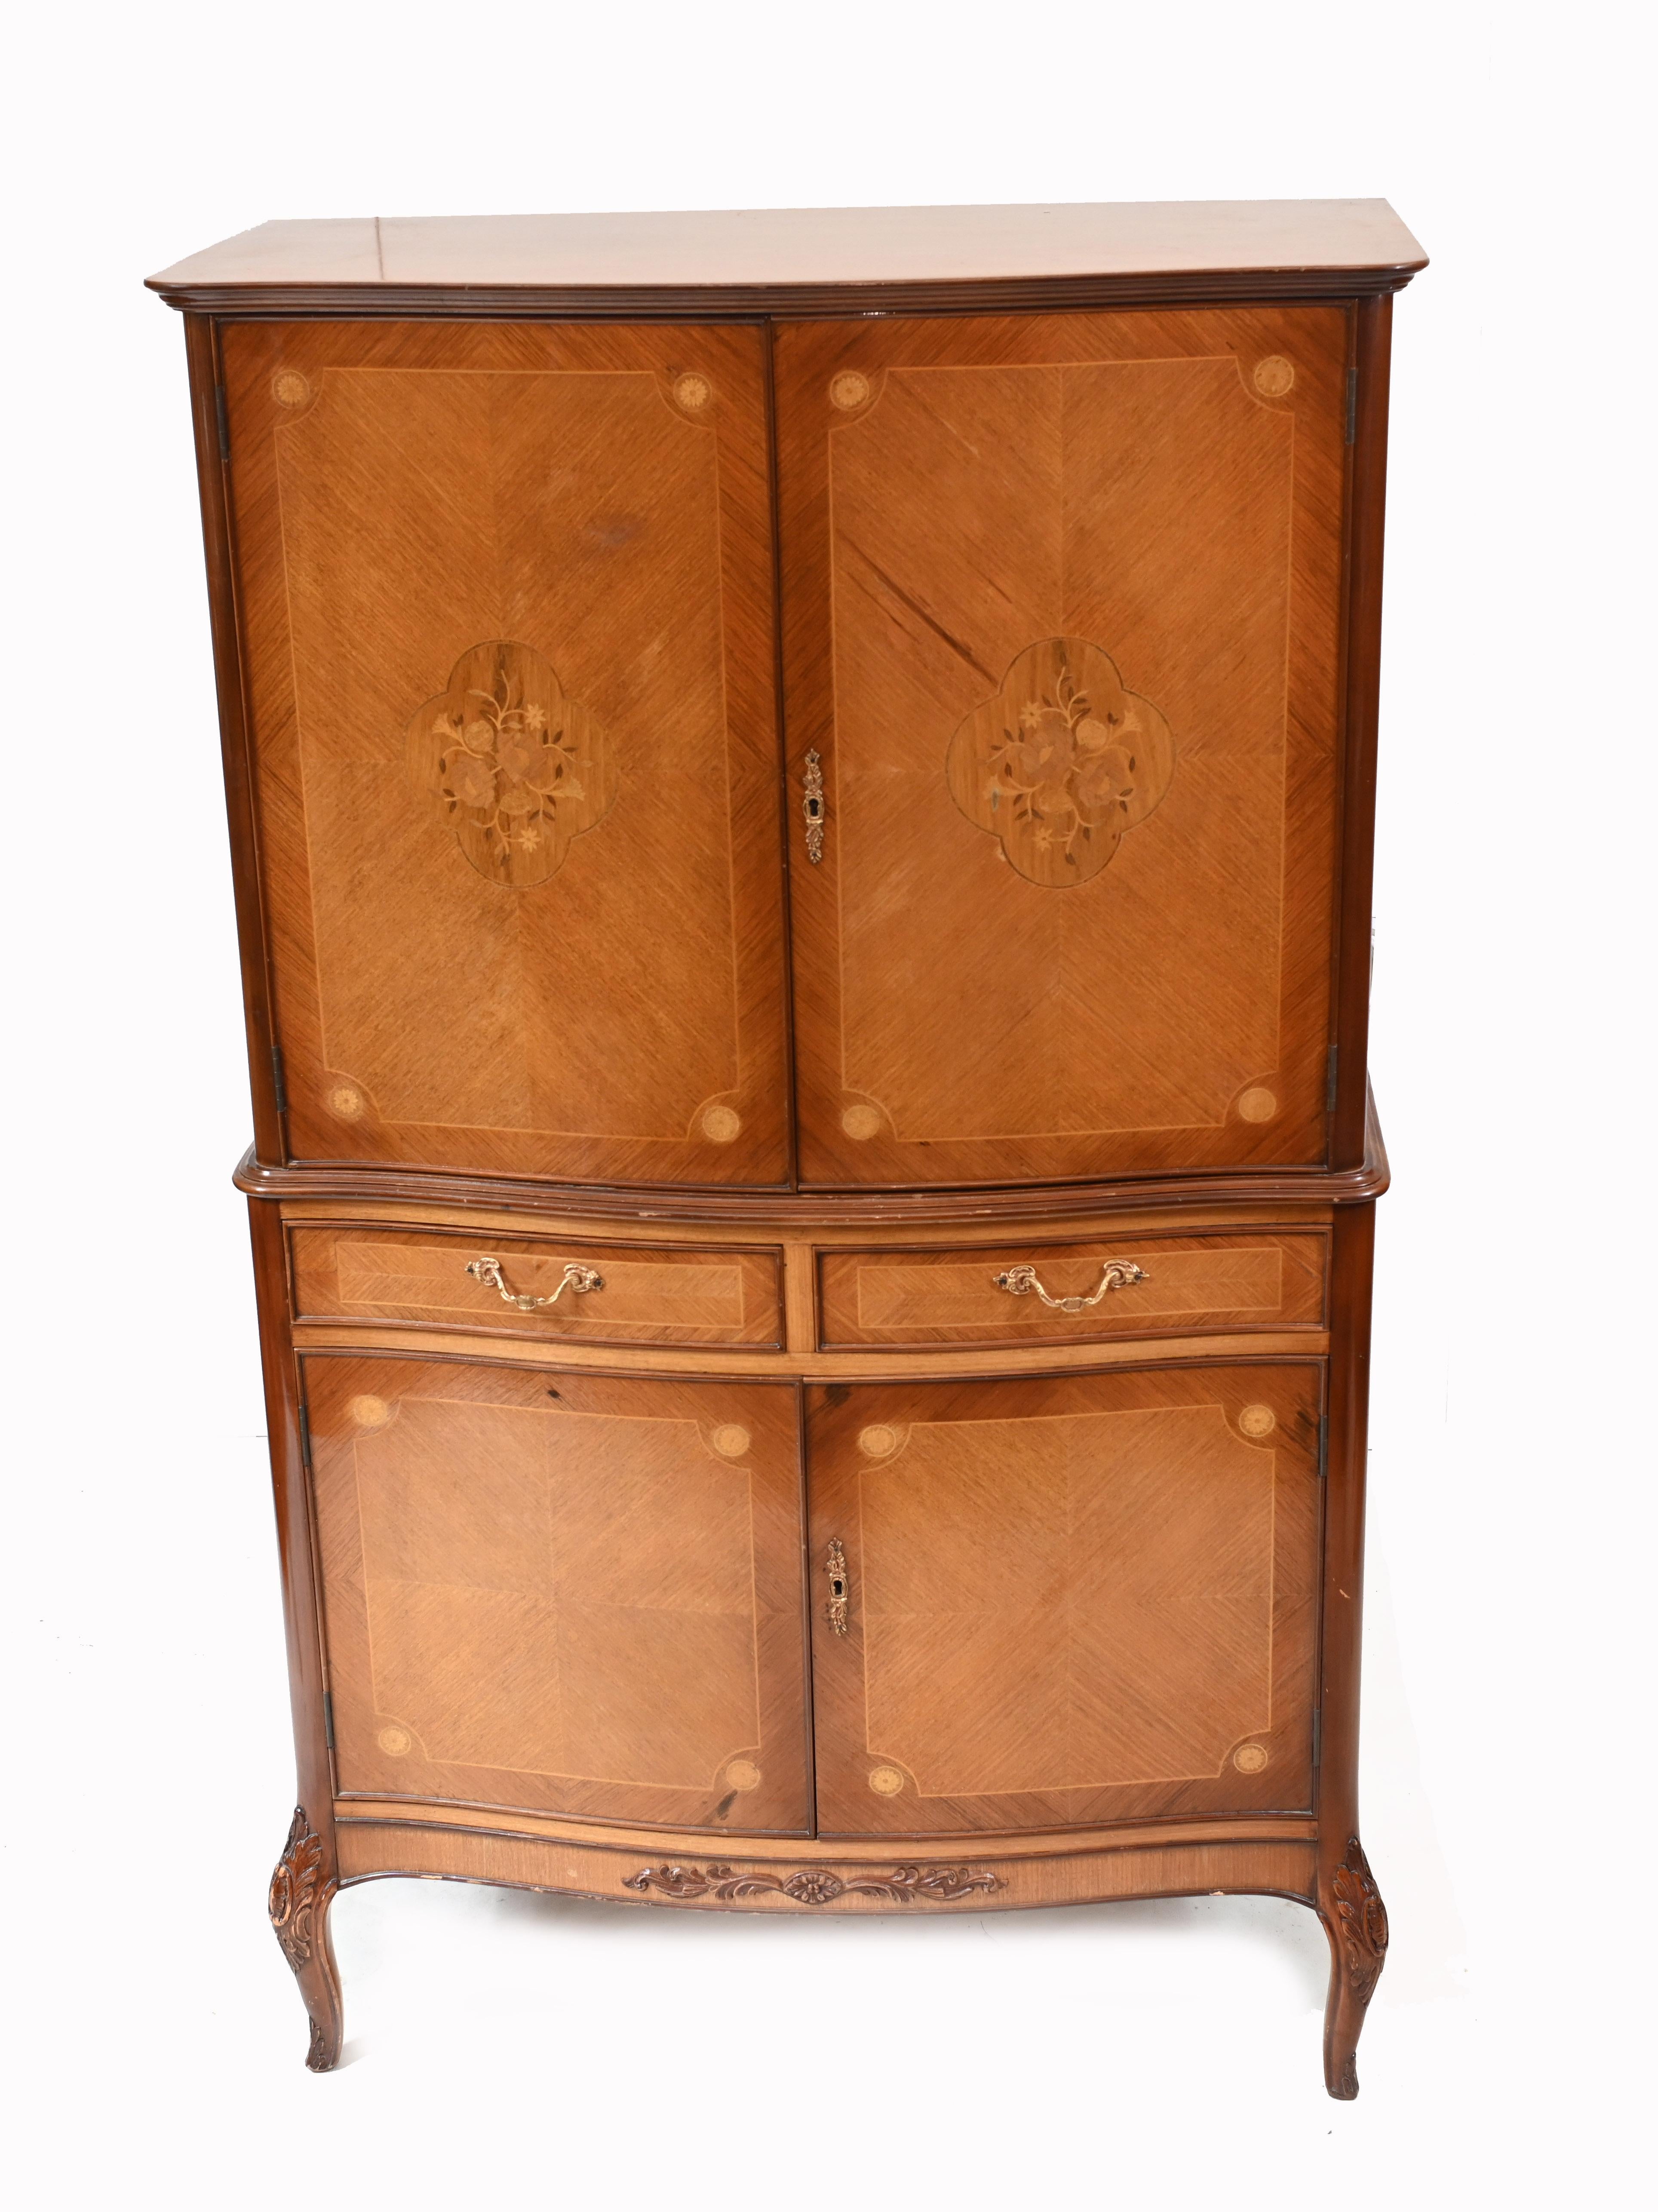 Classic Art Deco drinks or cocktail cabinet in the Epstein manner.
Hand crafted from walnut with intricate inlay work to the front.
Piece opens out to reveal drinks making area - even the light still works.
Circa 1930 on this fine specimen of a